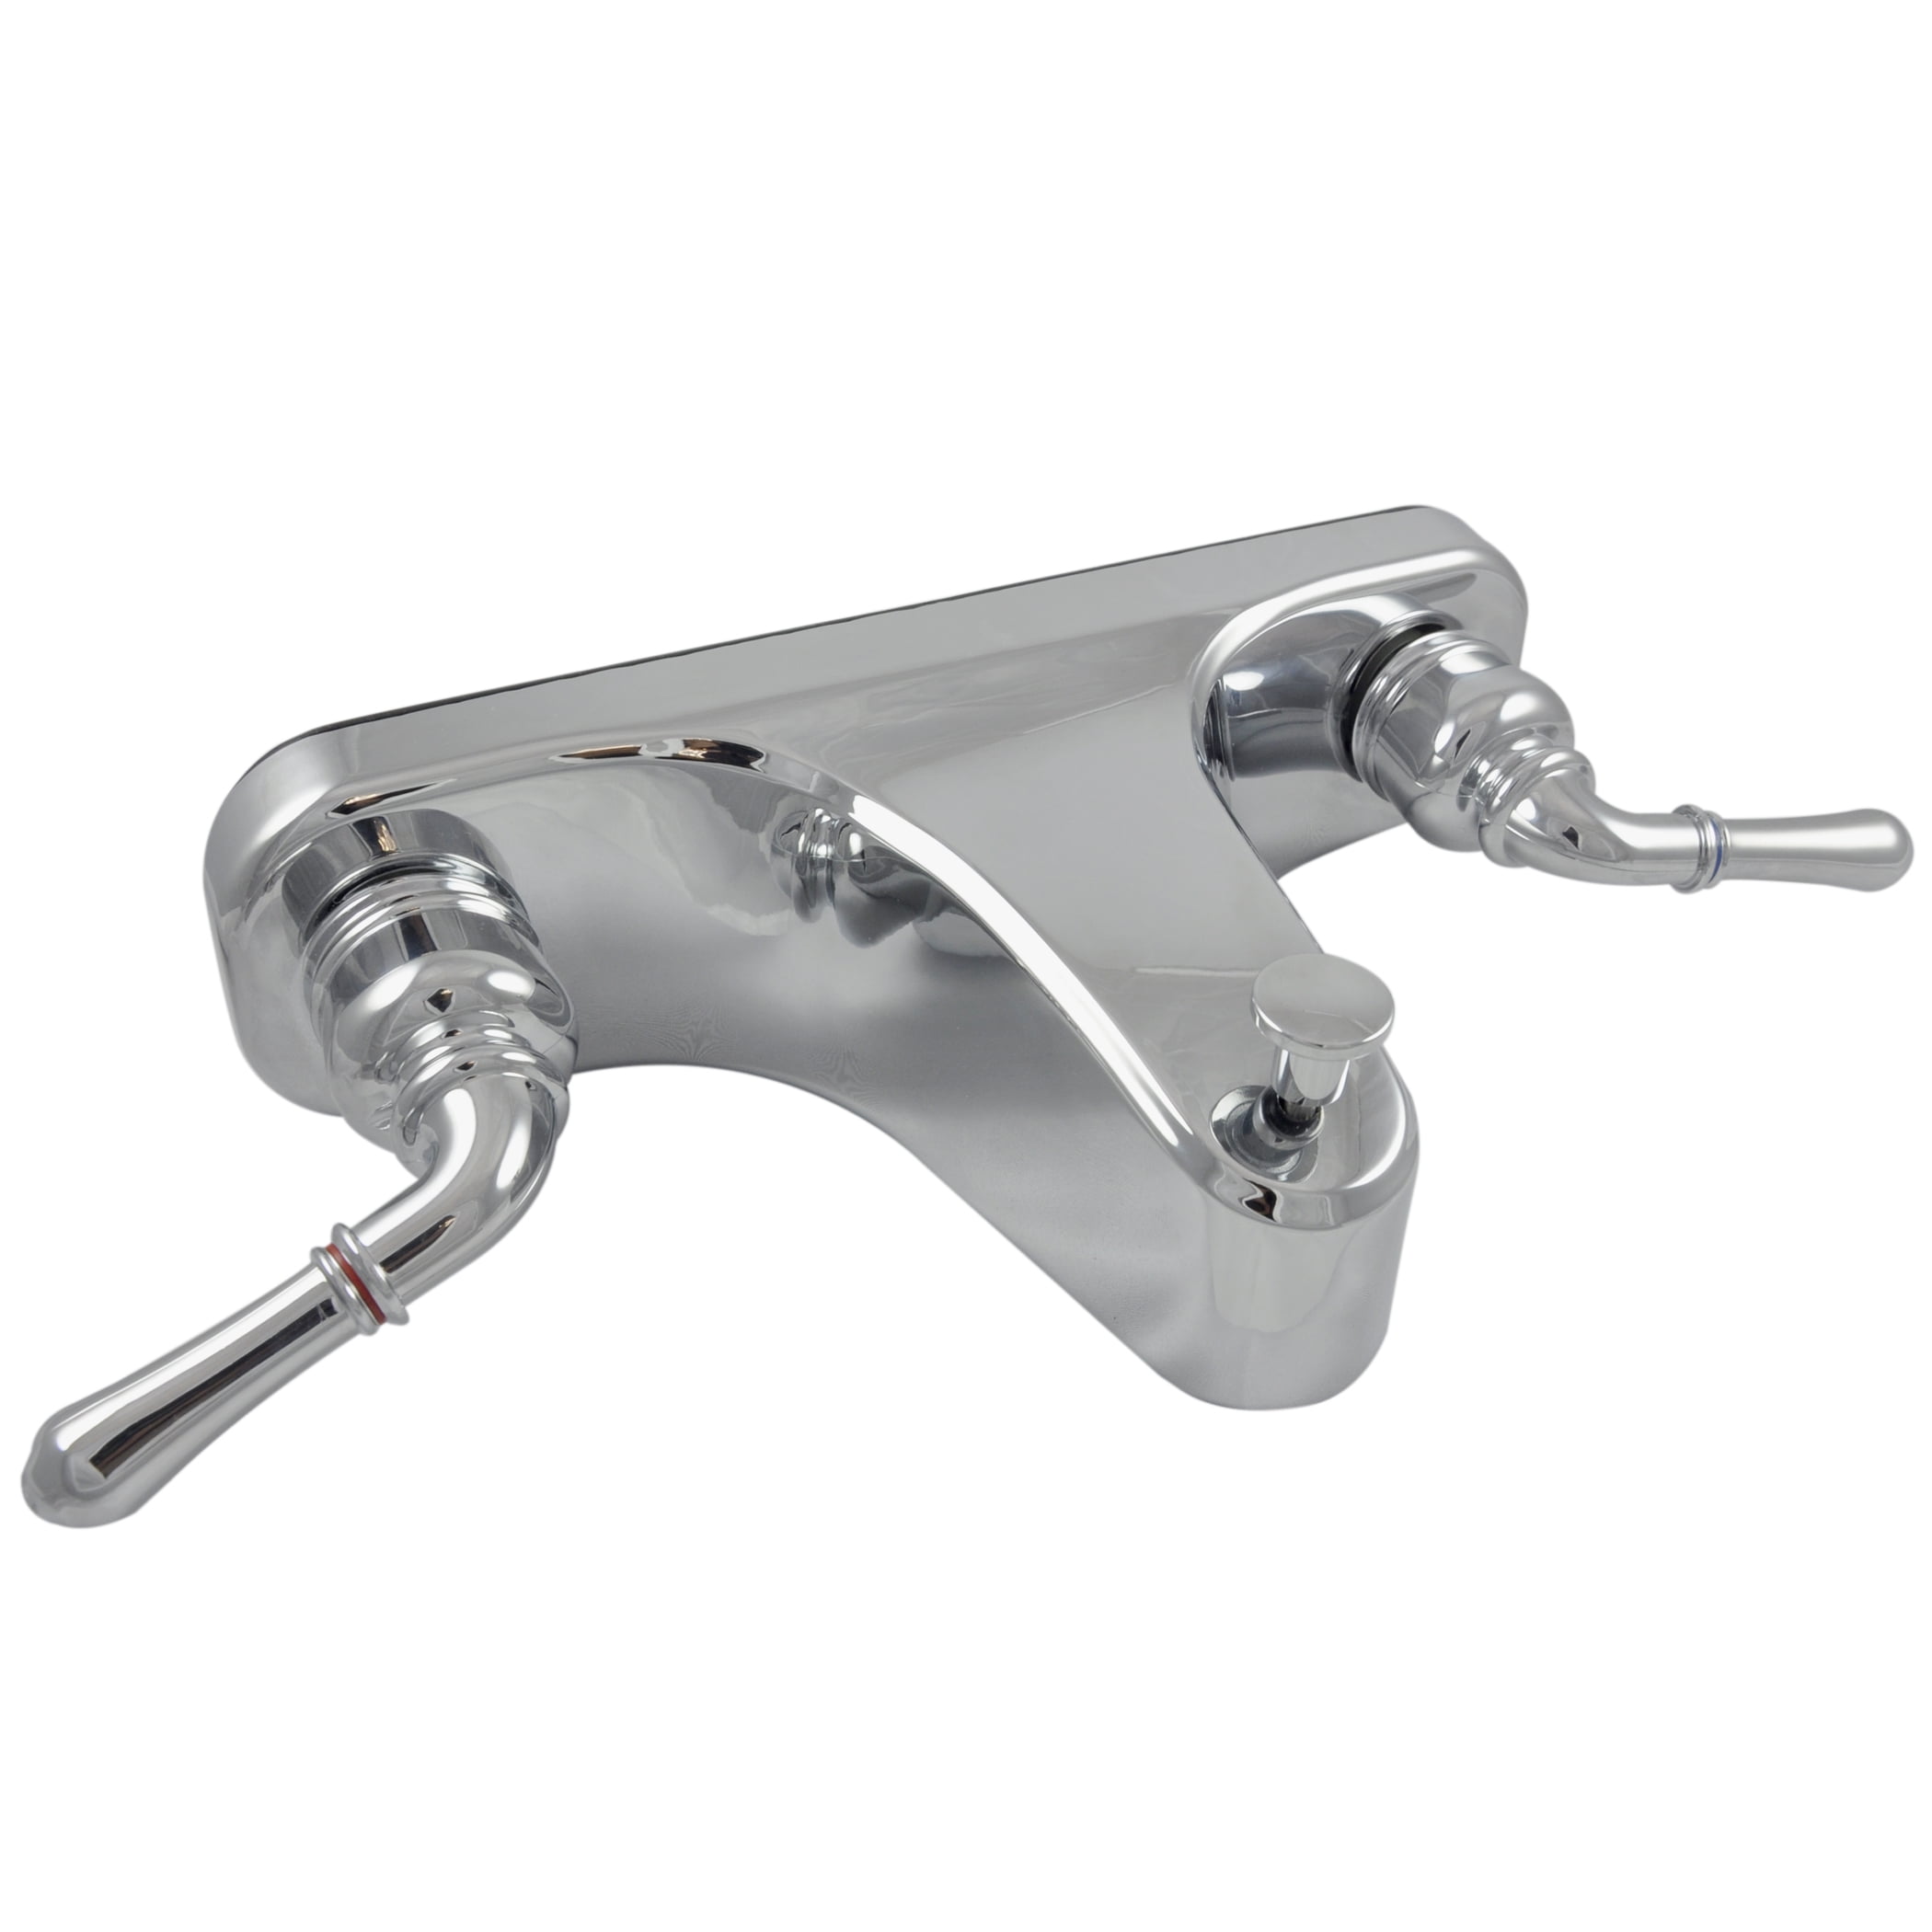 10882x 8 In. Mobile Home Center-set Tub & Shower Faucet